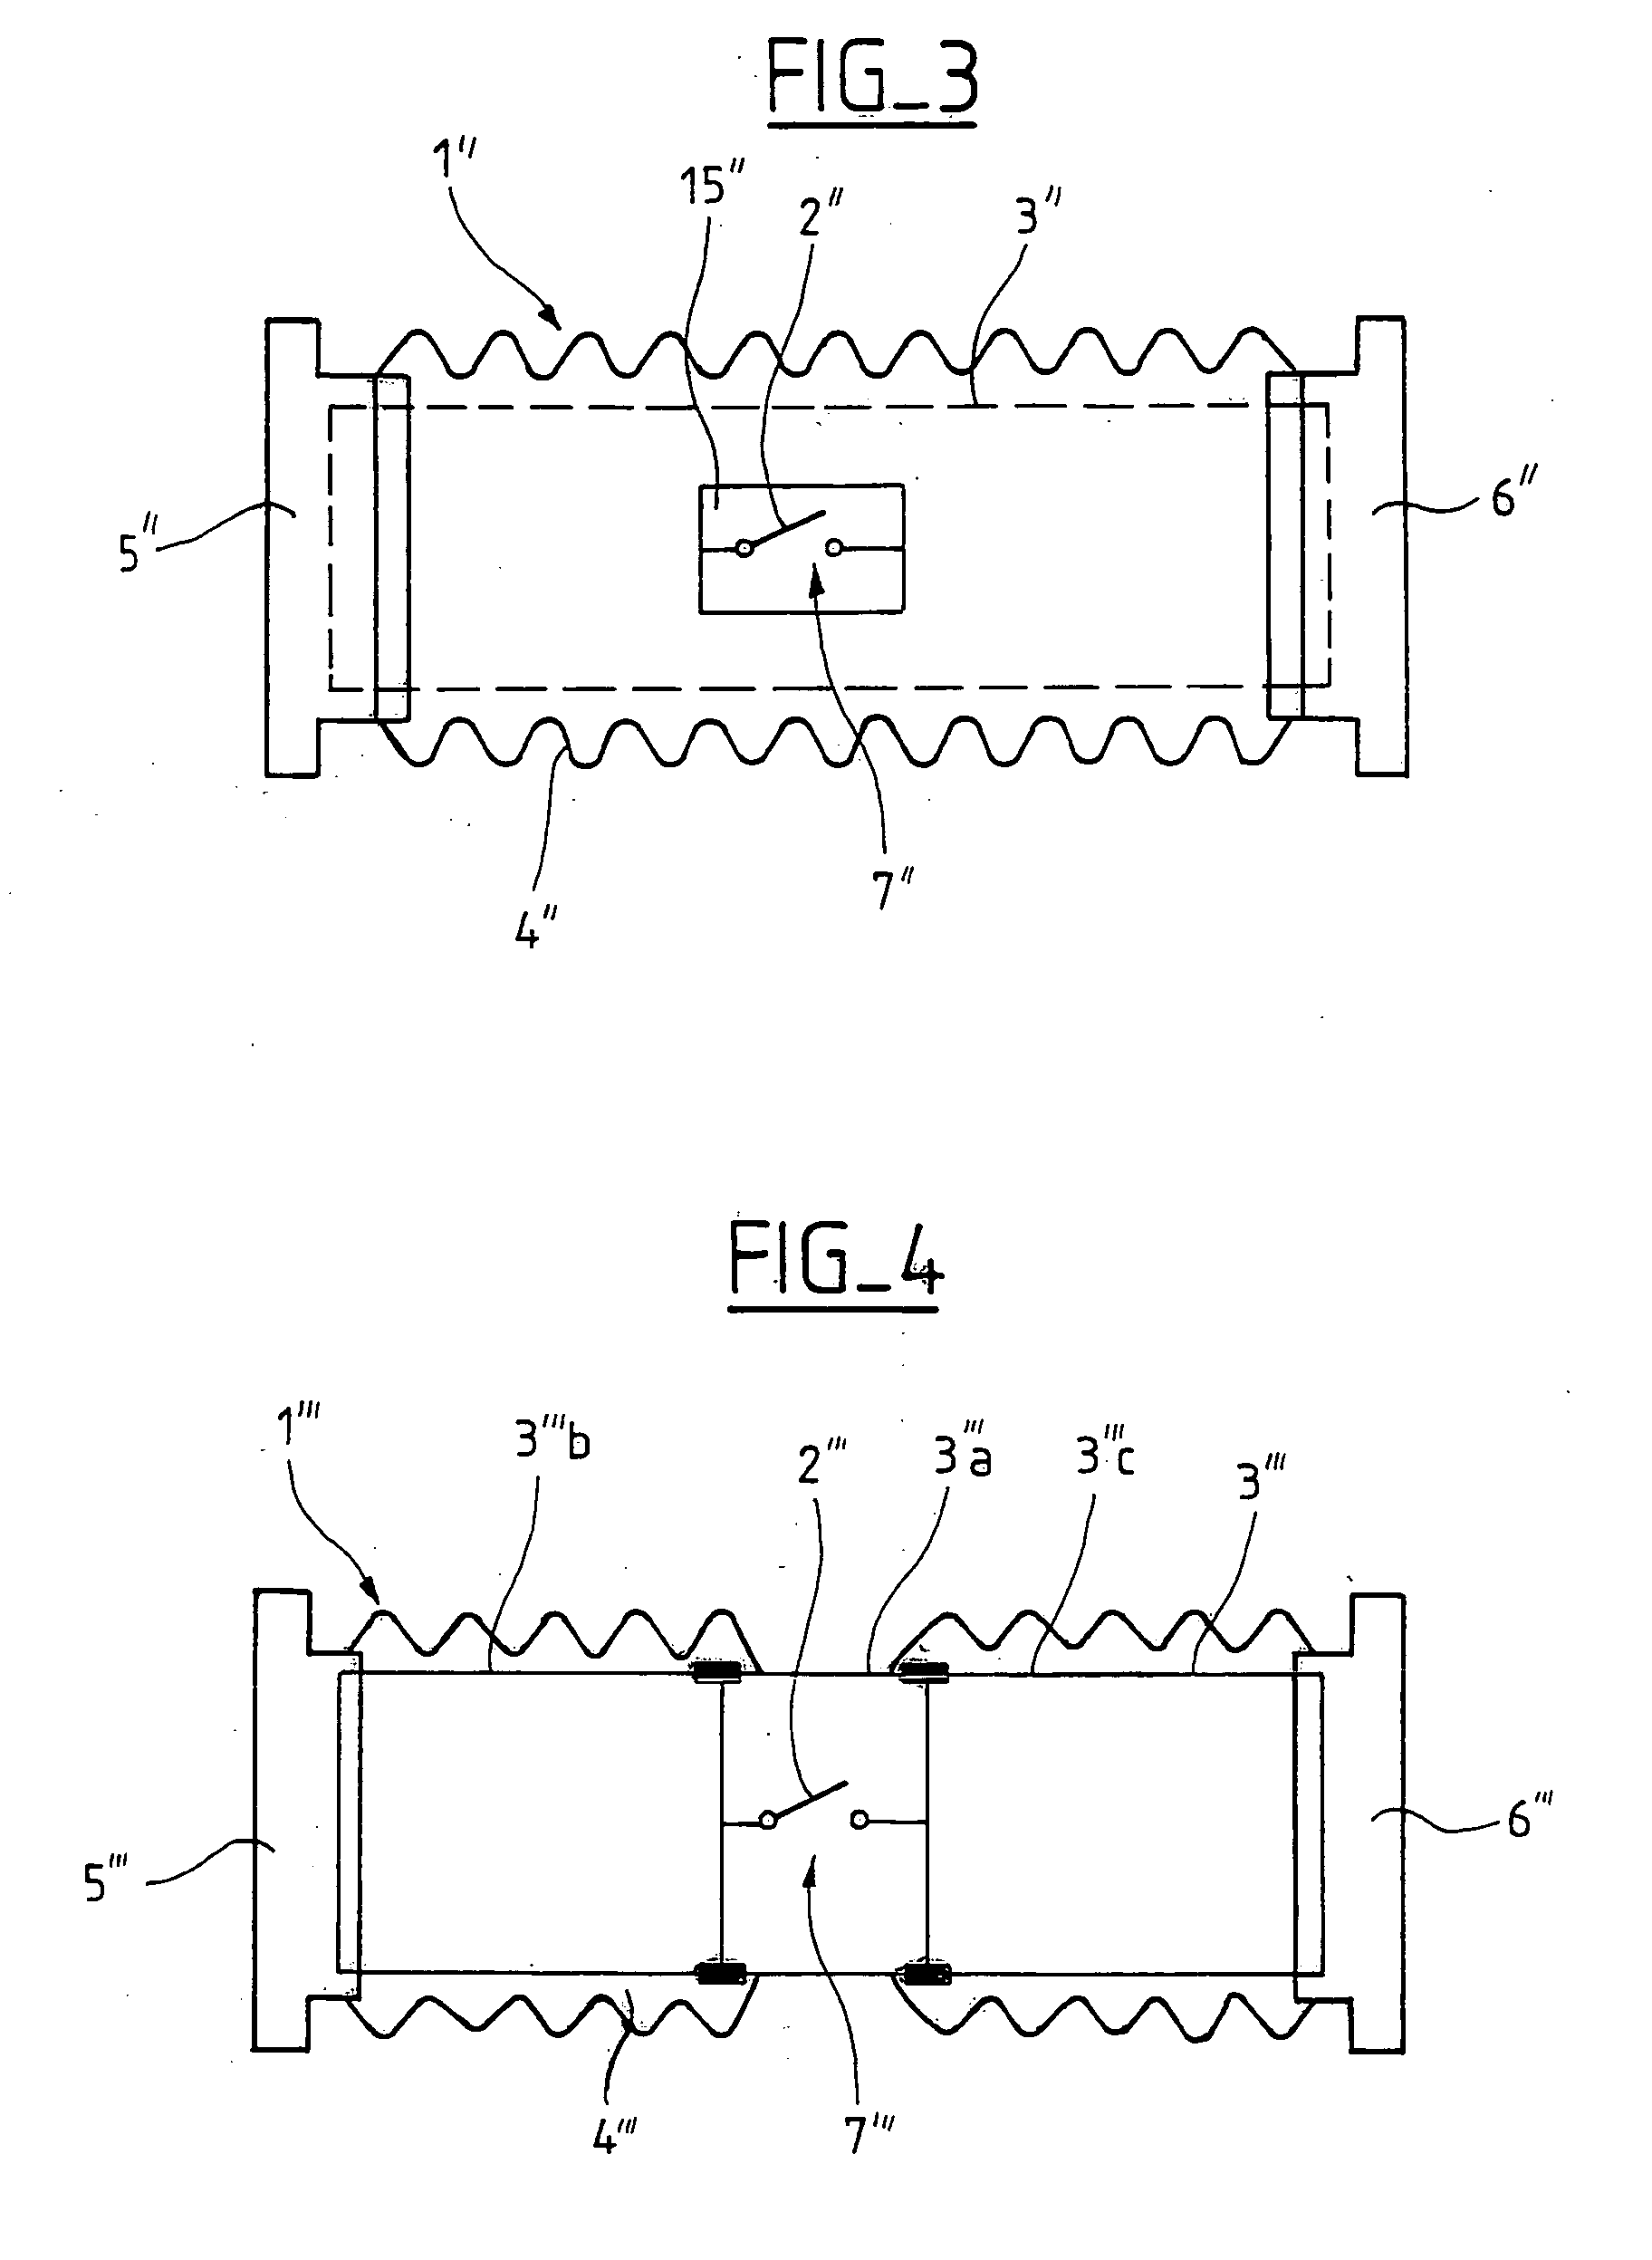 Electrical Device Containing Insulating Gas Under Pressure and Including a Composite Insulator Provided With a Window for Observing Contacts